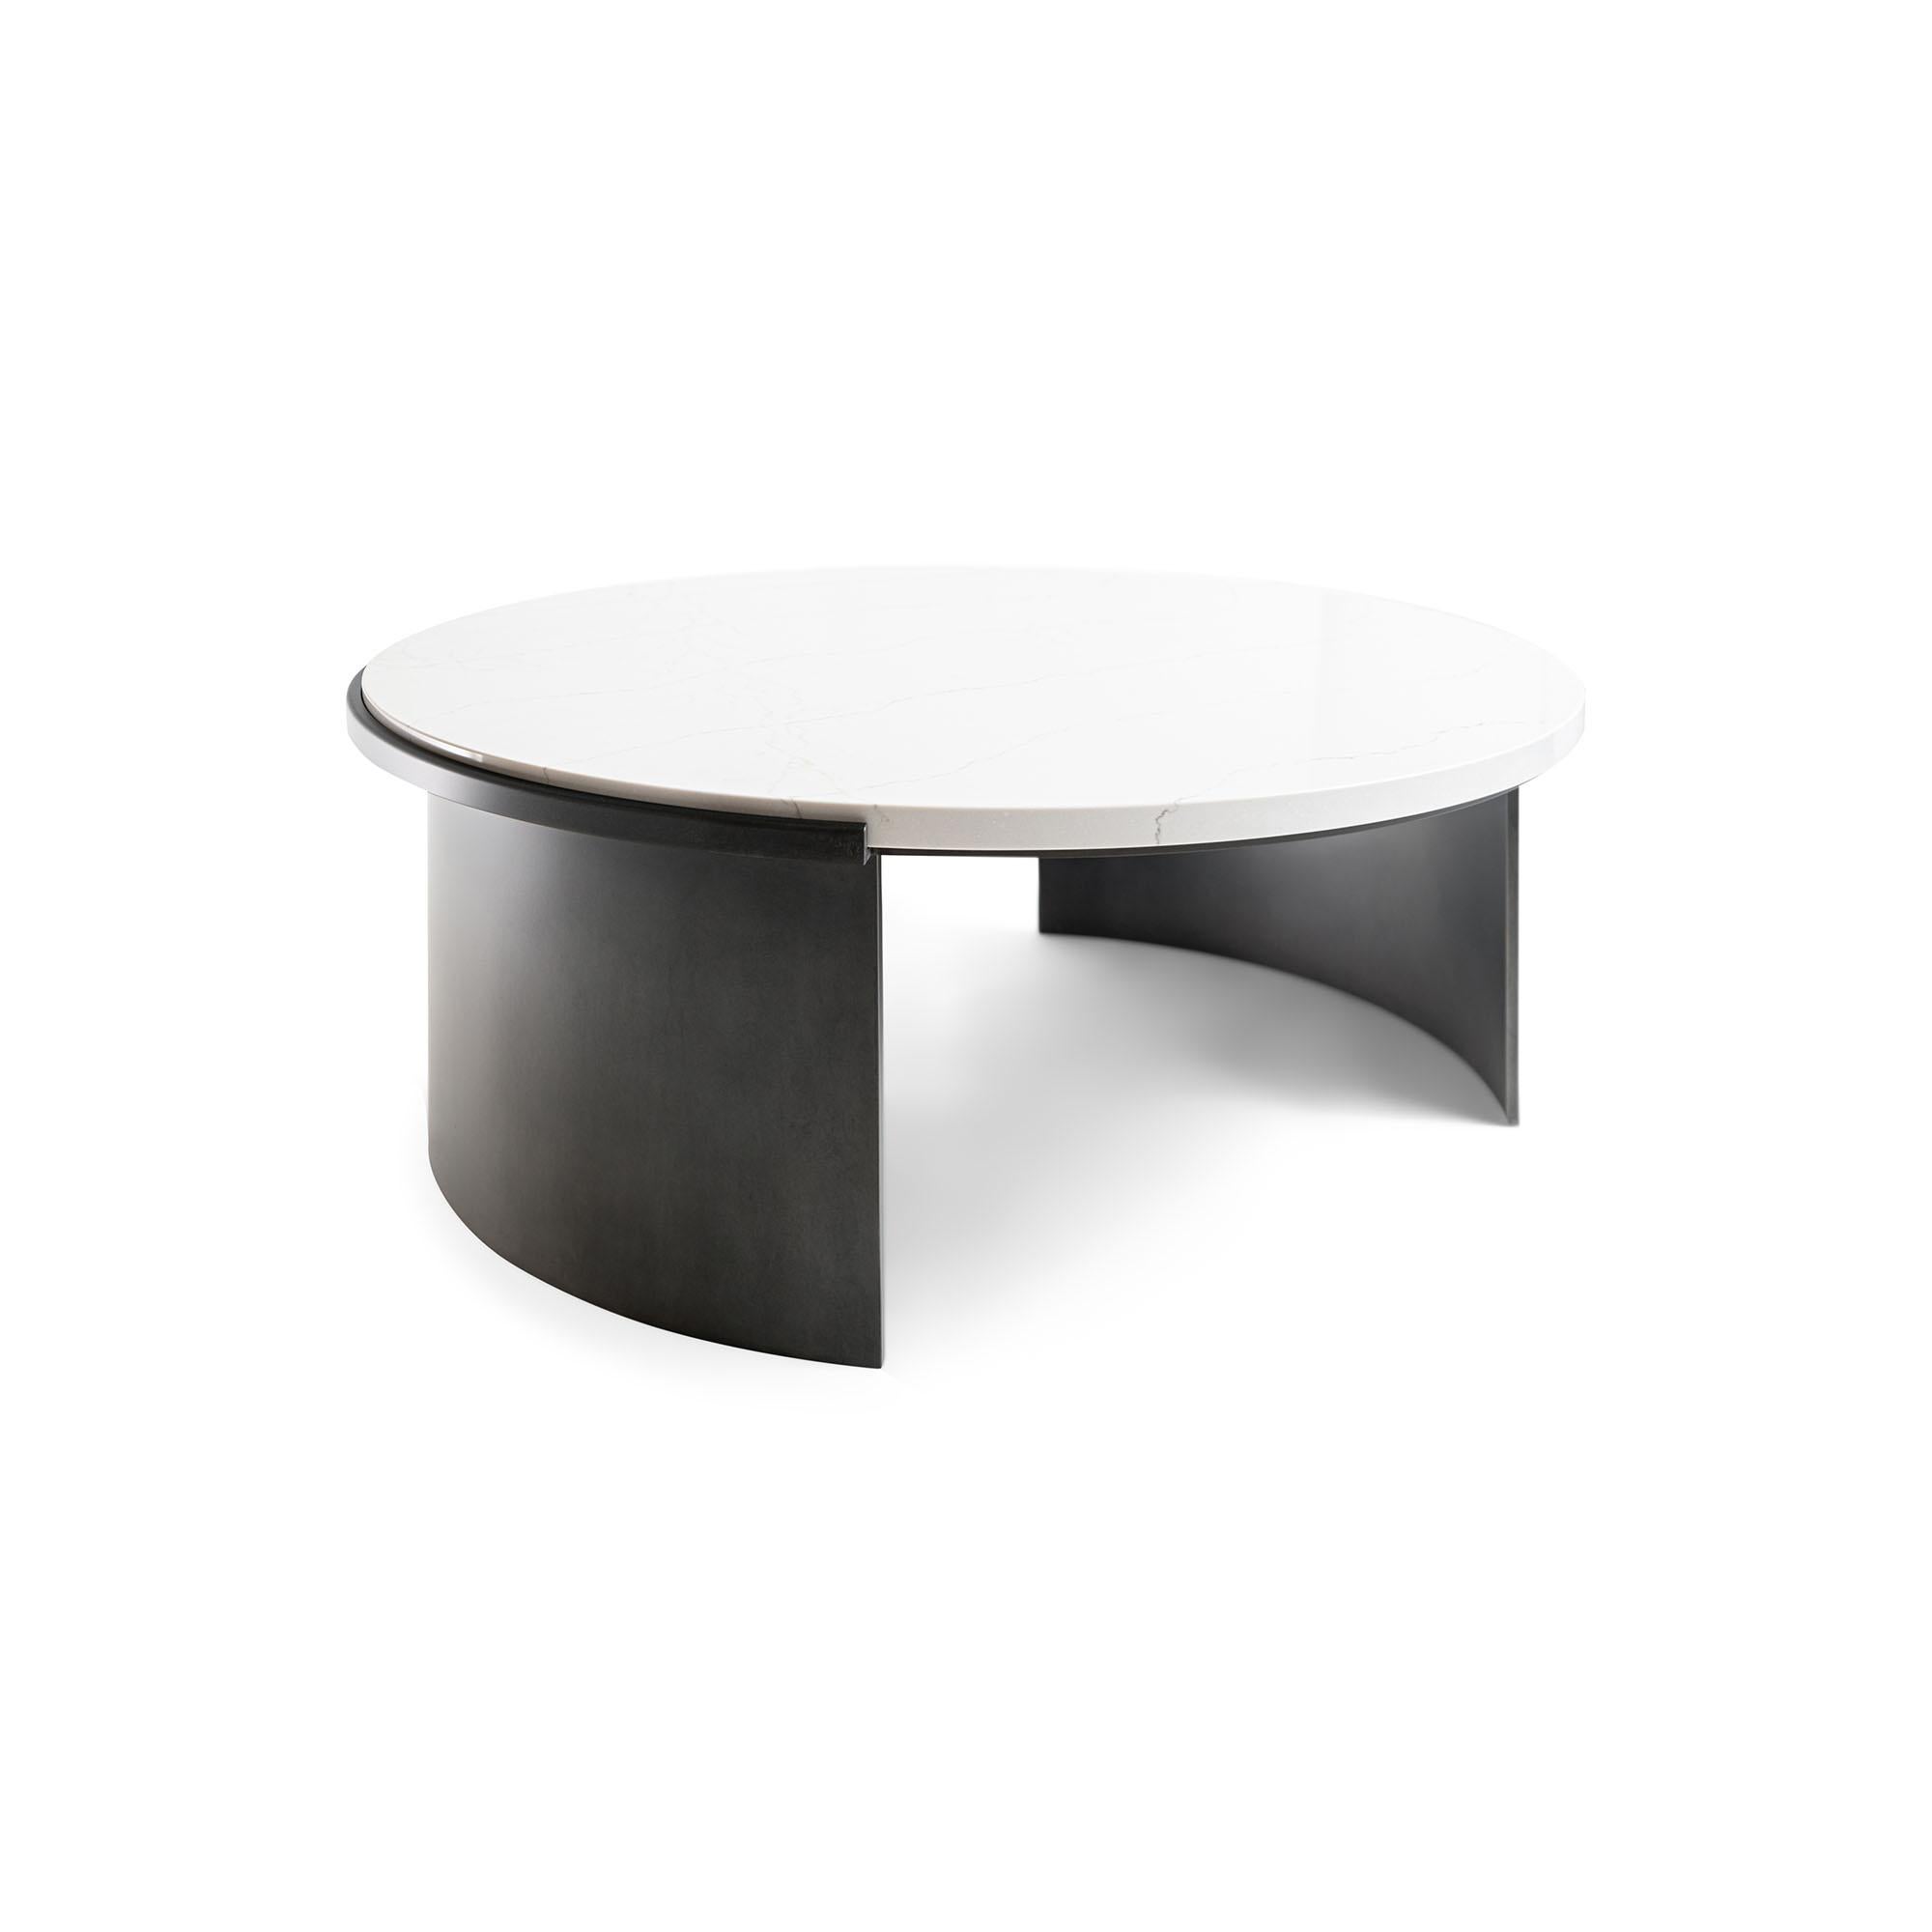 The LUMA Design Workshop float occasional table is the result of thoughtful design and expert craftsmanship. An Ella Cambria Quartz stone top is held by an Antique Steel formed metal base. 

Like all LUMA Furniture, this piece is made to order, and